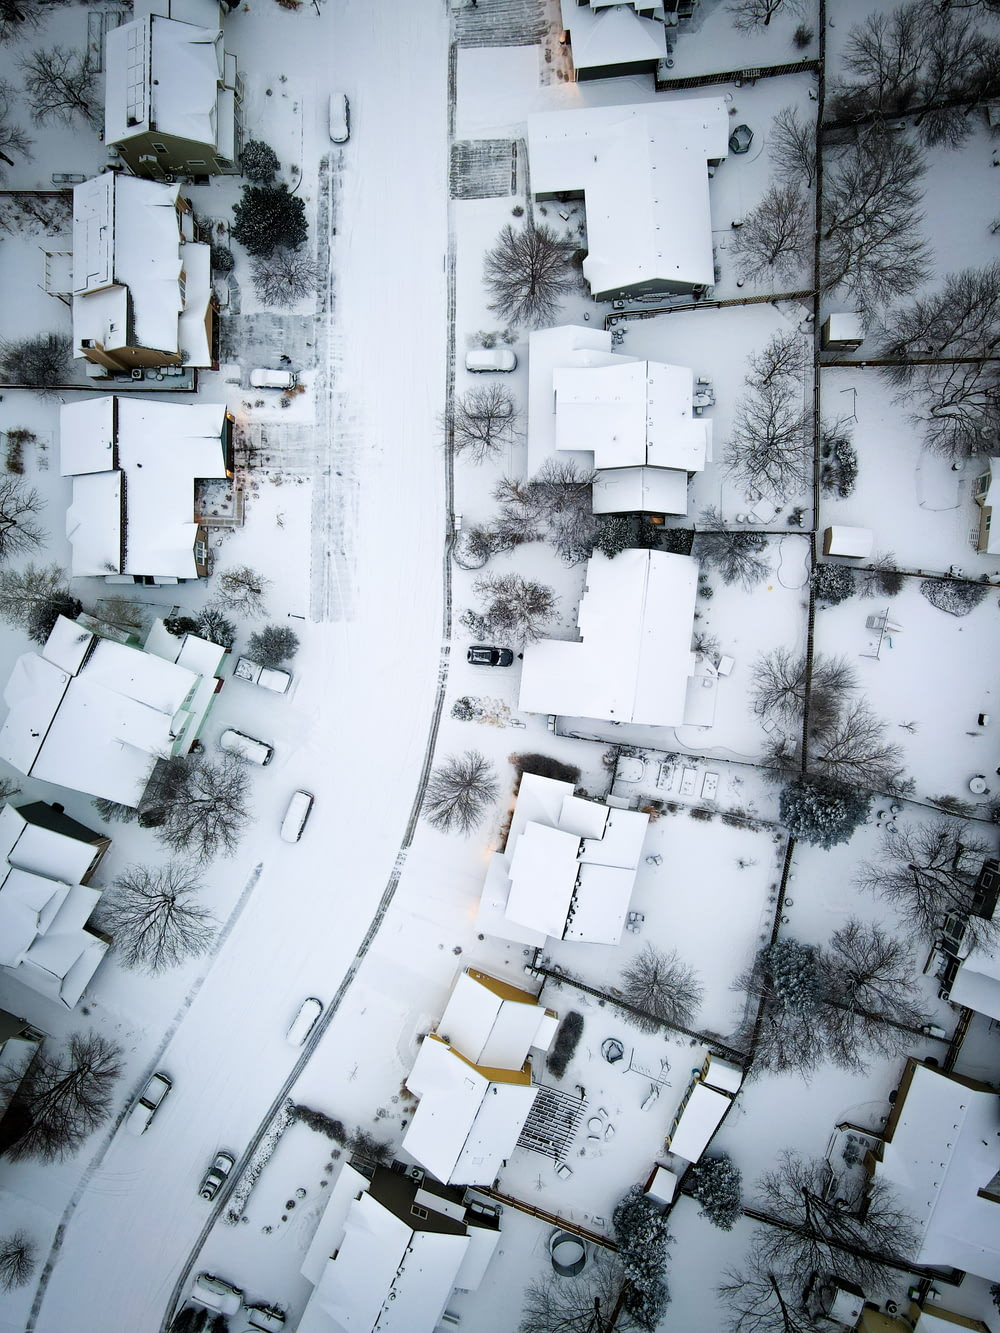 an aerial view of a neighborhood covered in snow